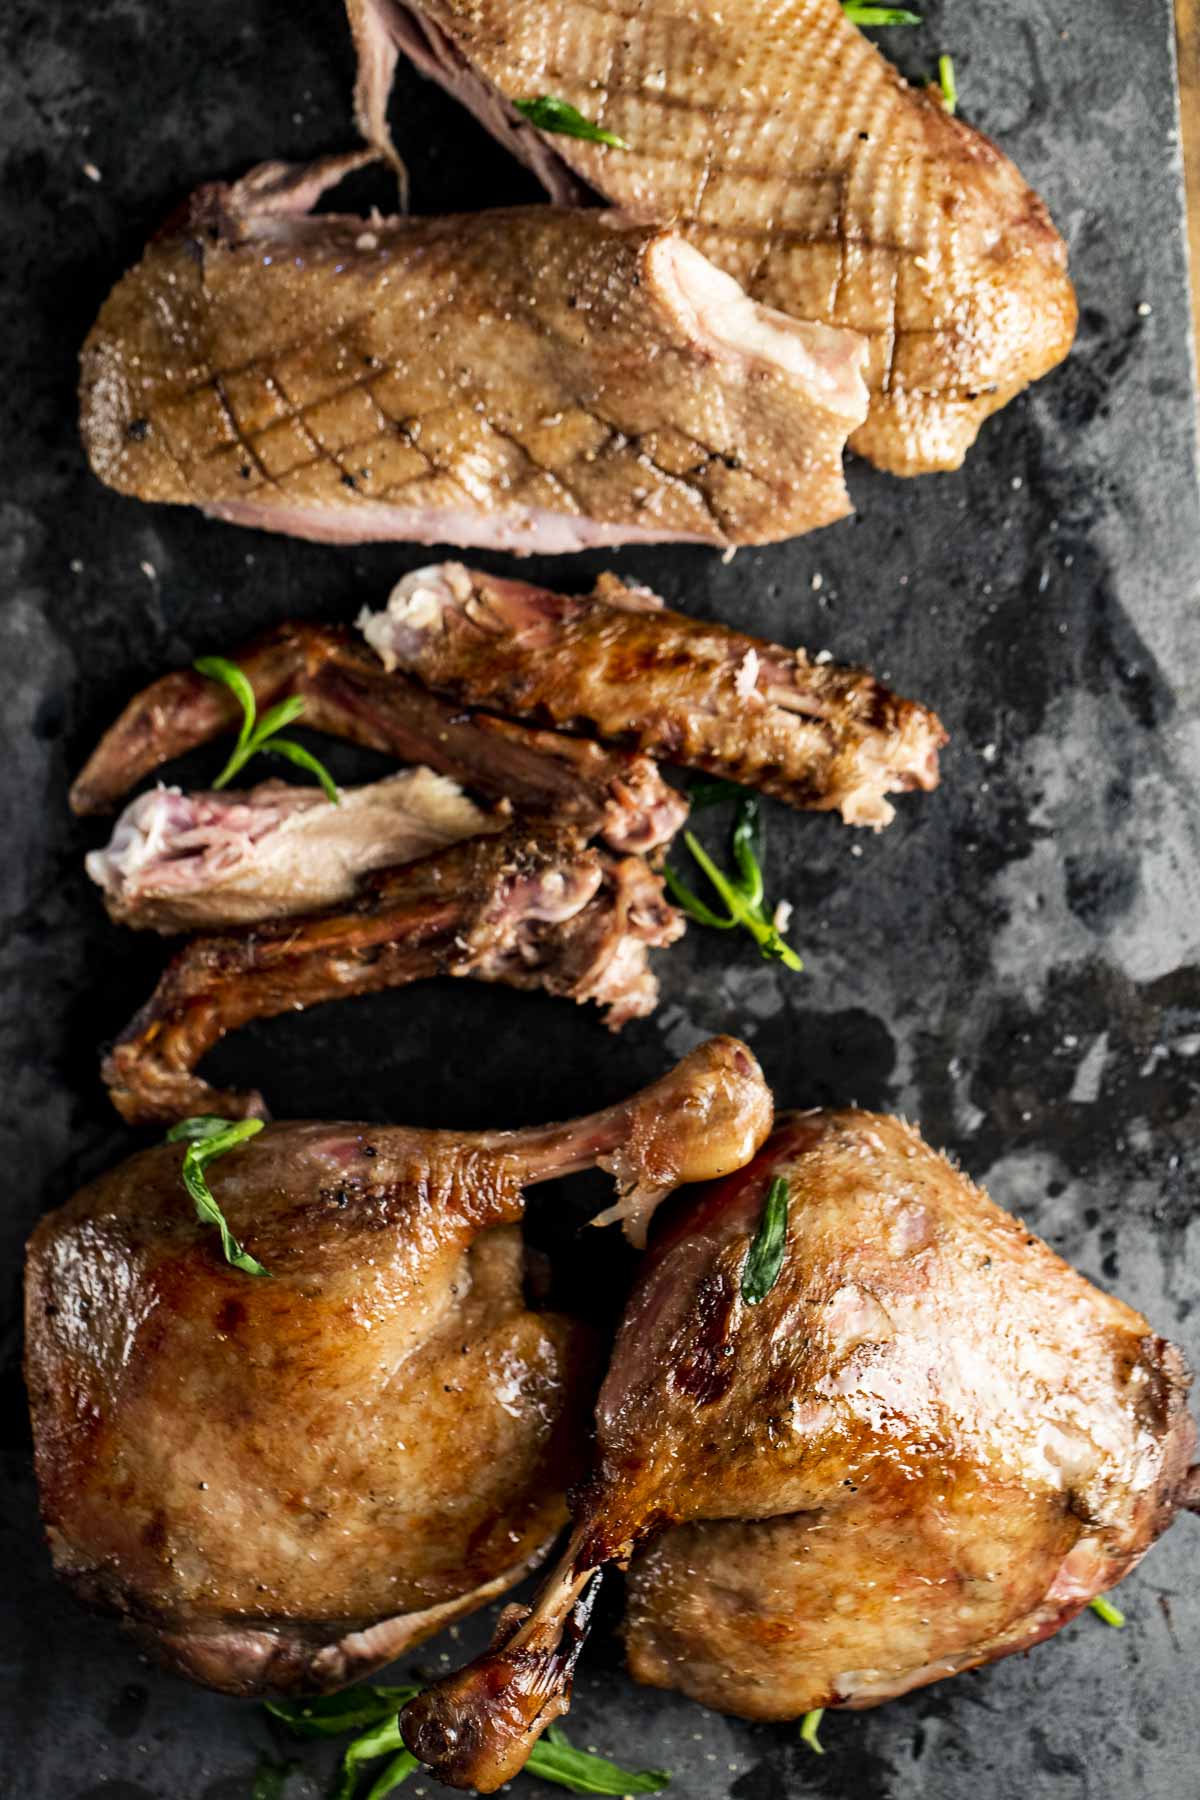 Overhead view of a carved whole duck on a pan.